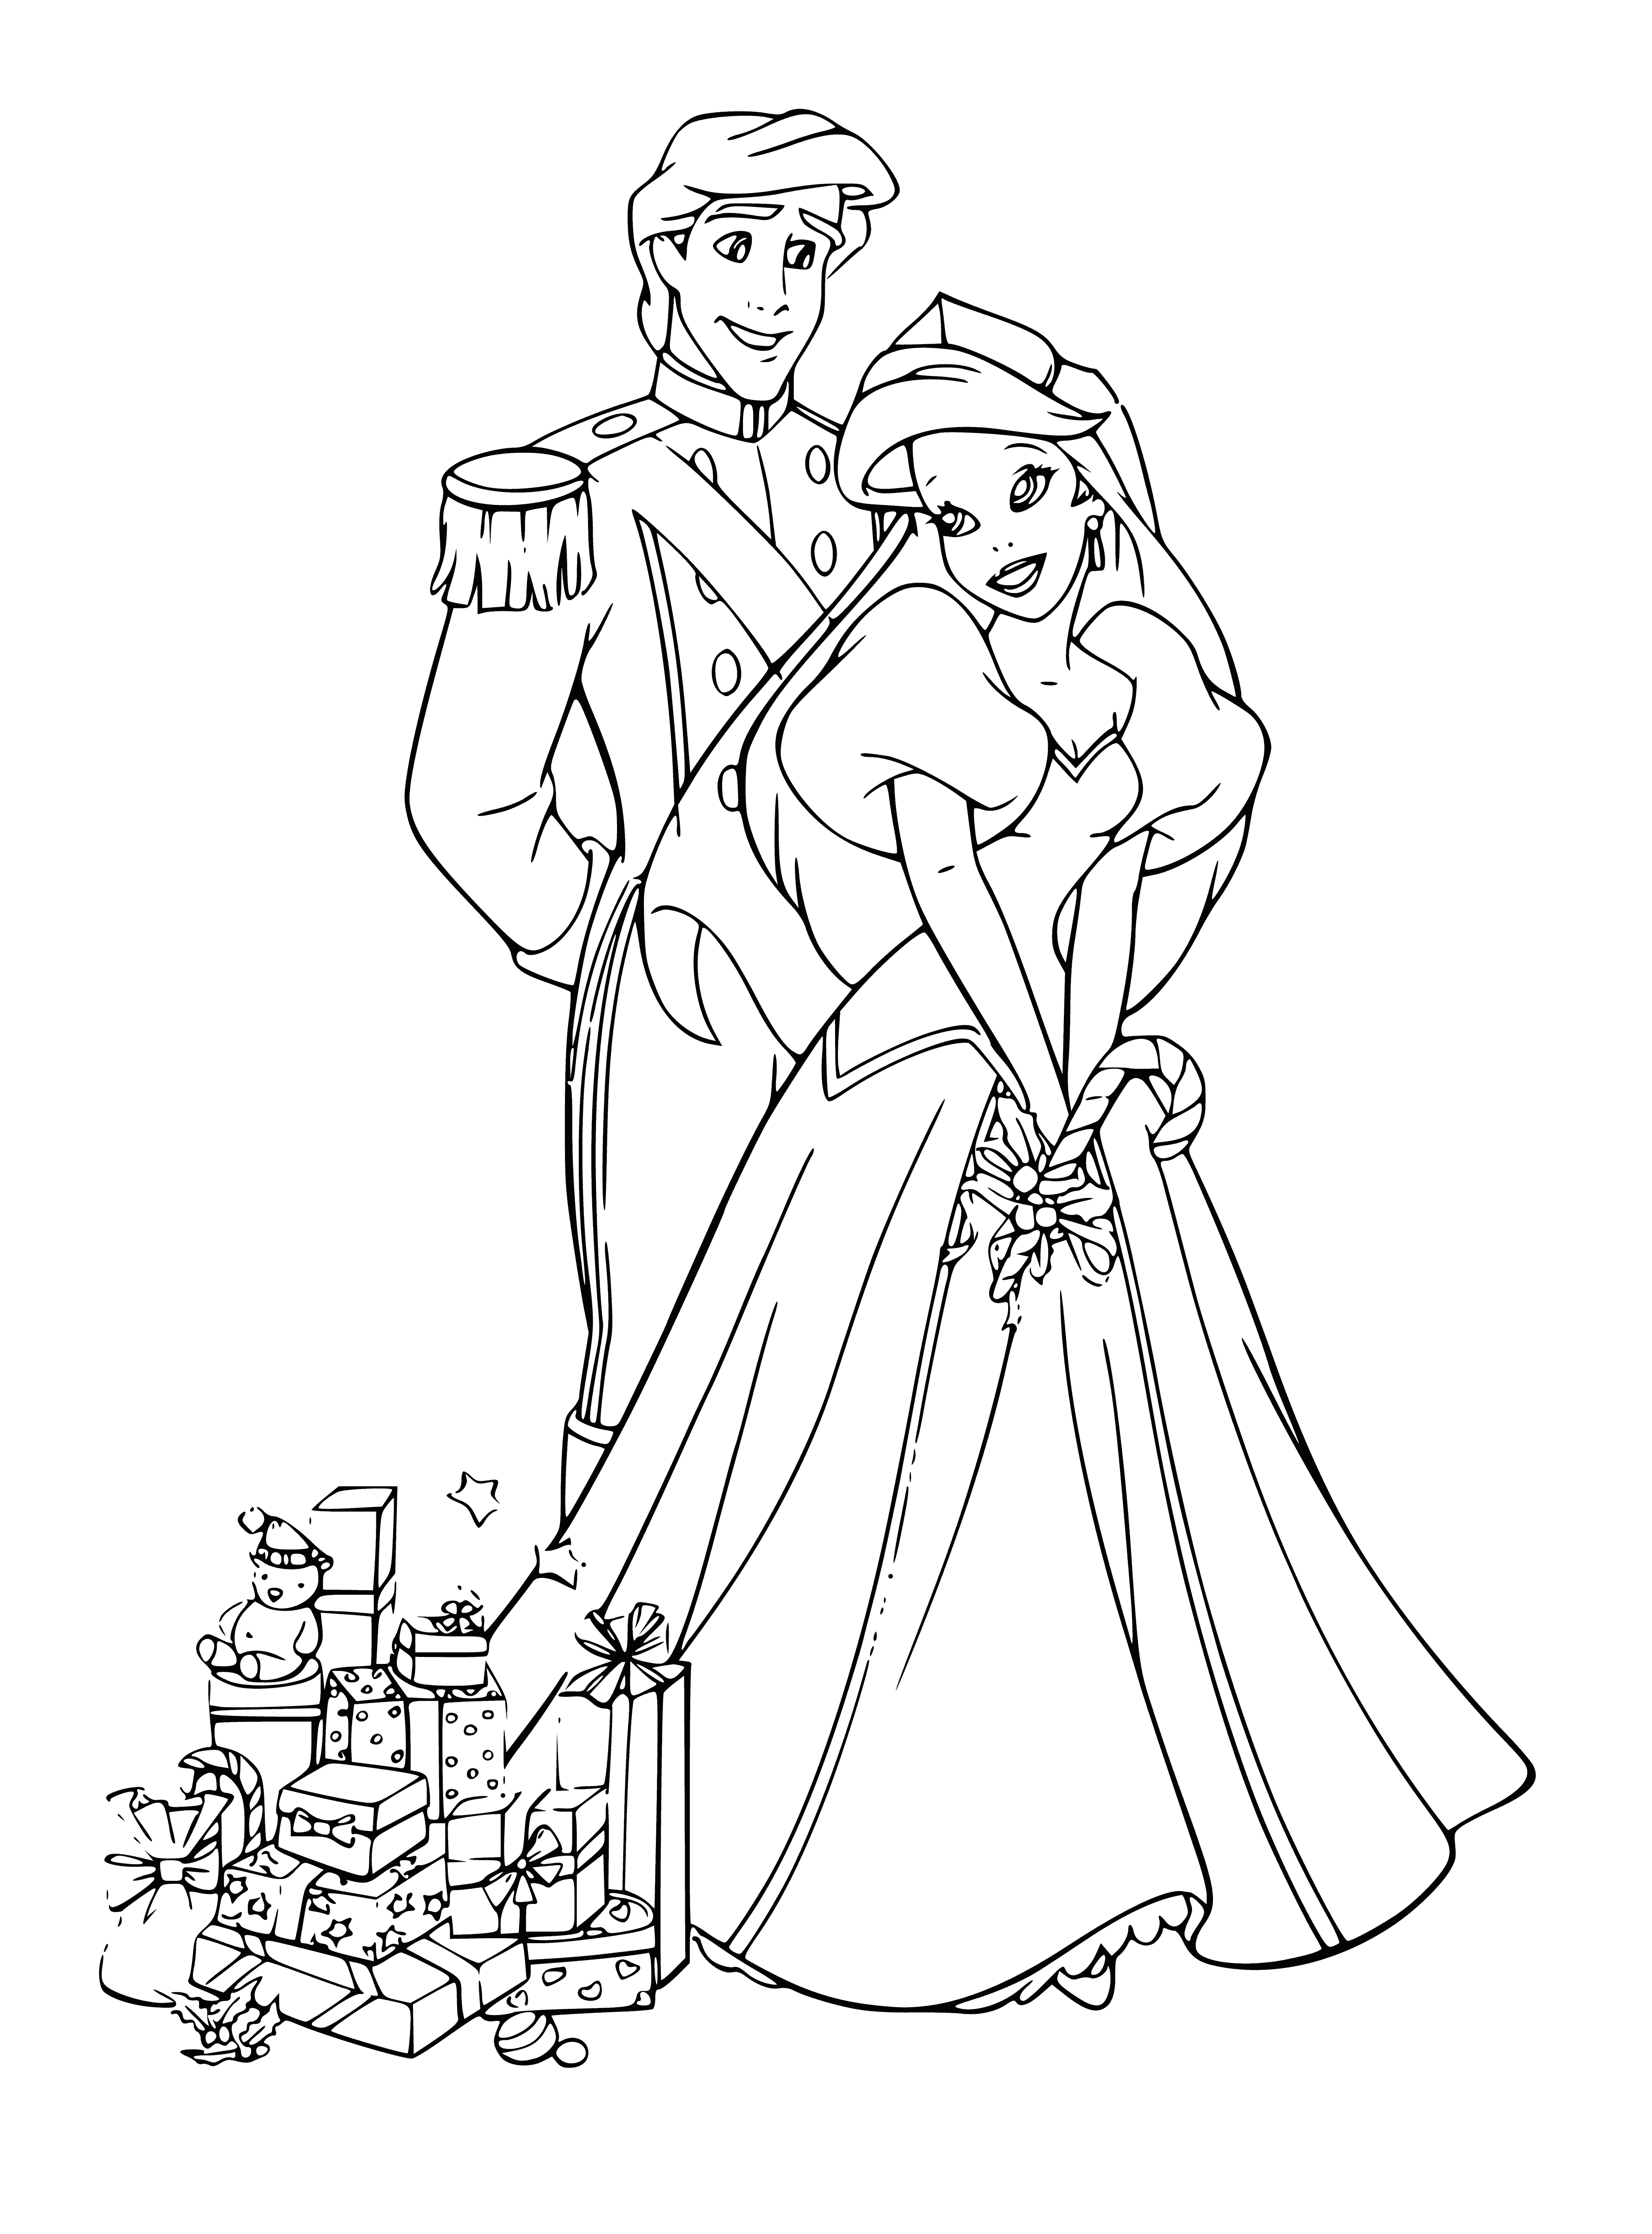 Ariel and Prince Eric coloring page